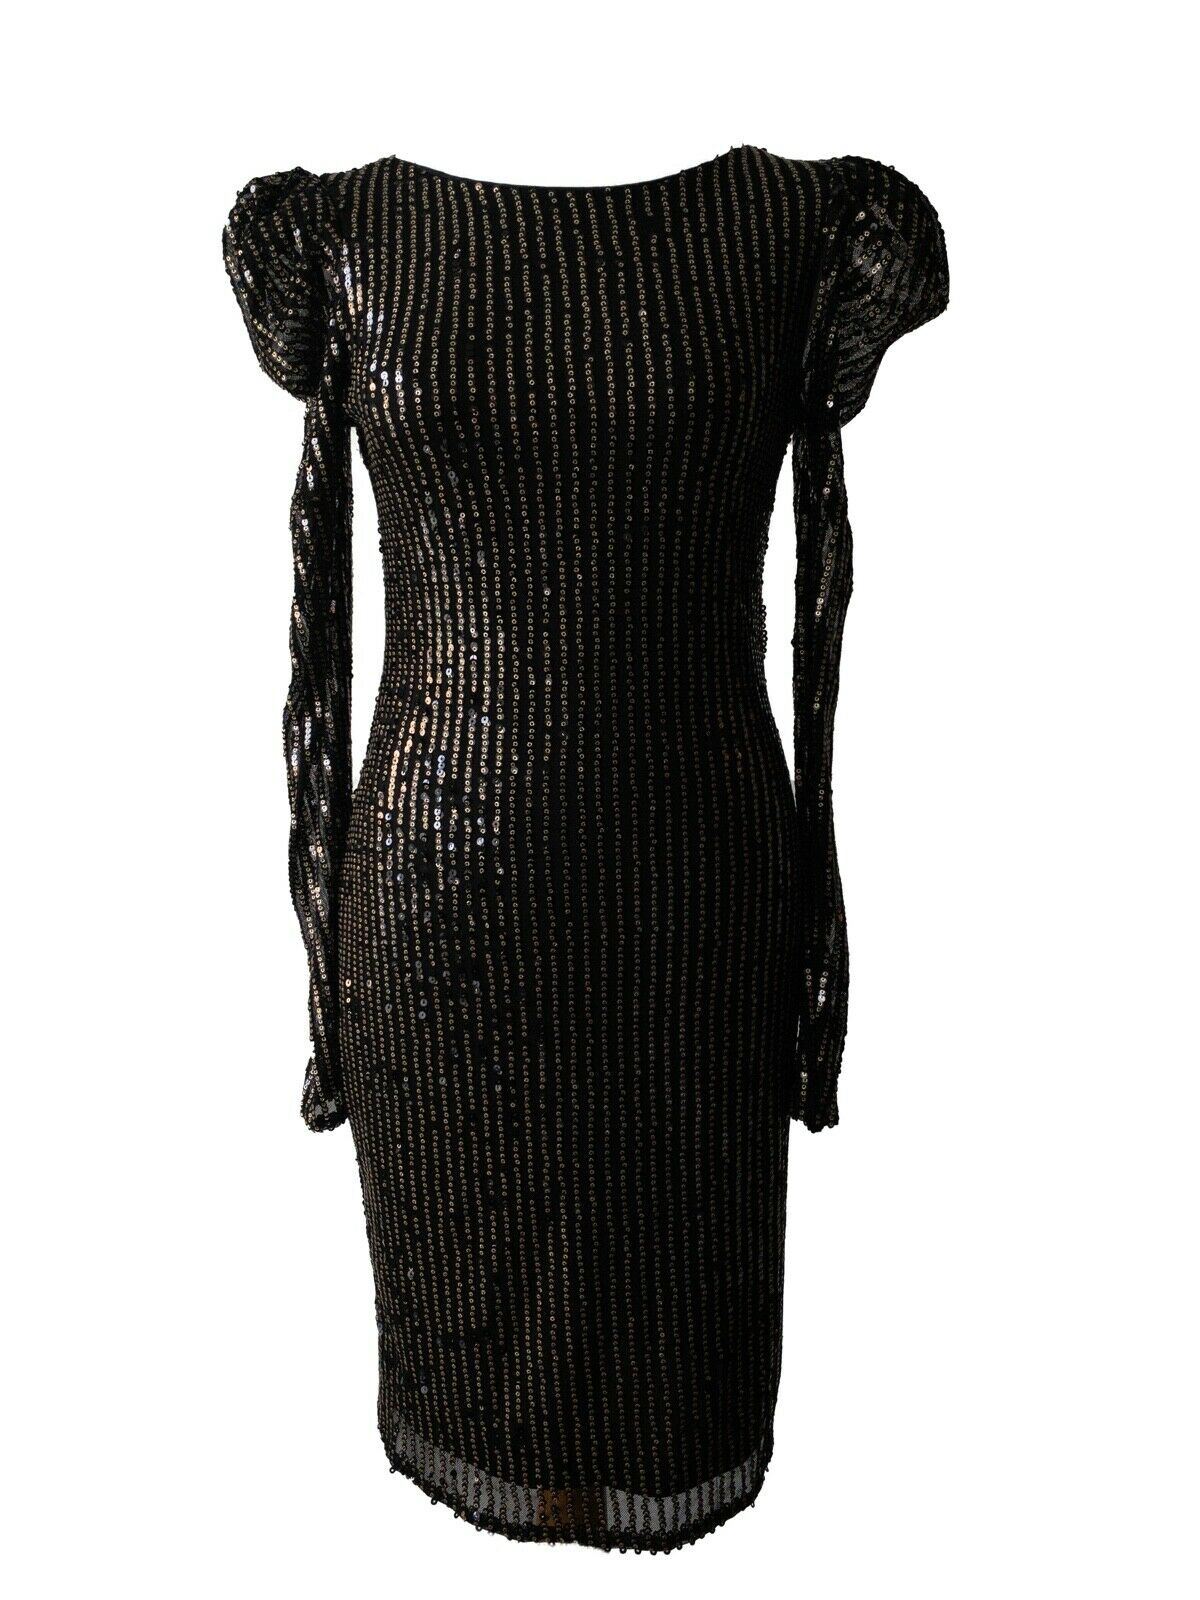 Sequinned Layered Shift Dress Black with Gold Sequins Size 10 / 12